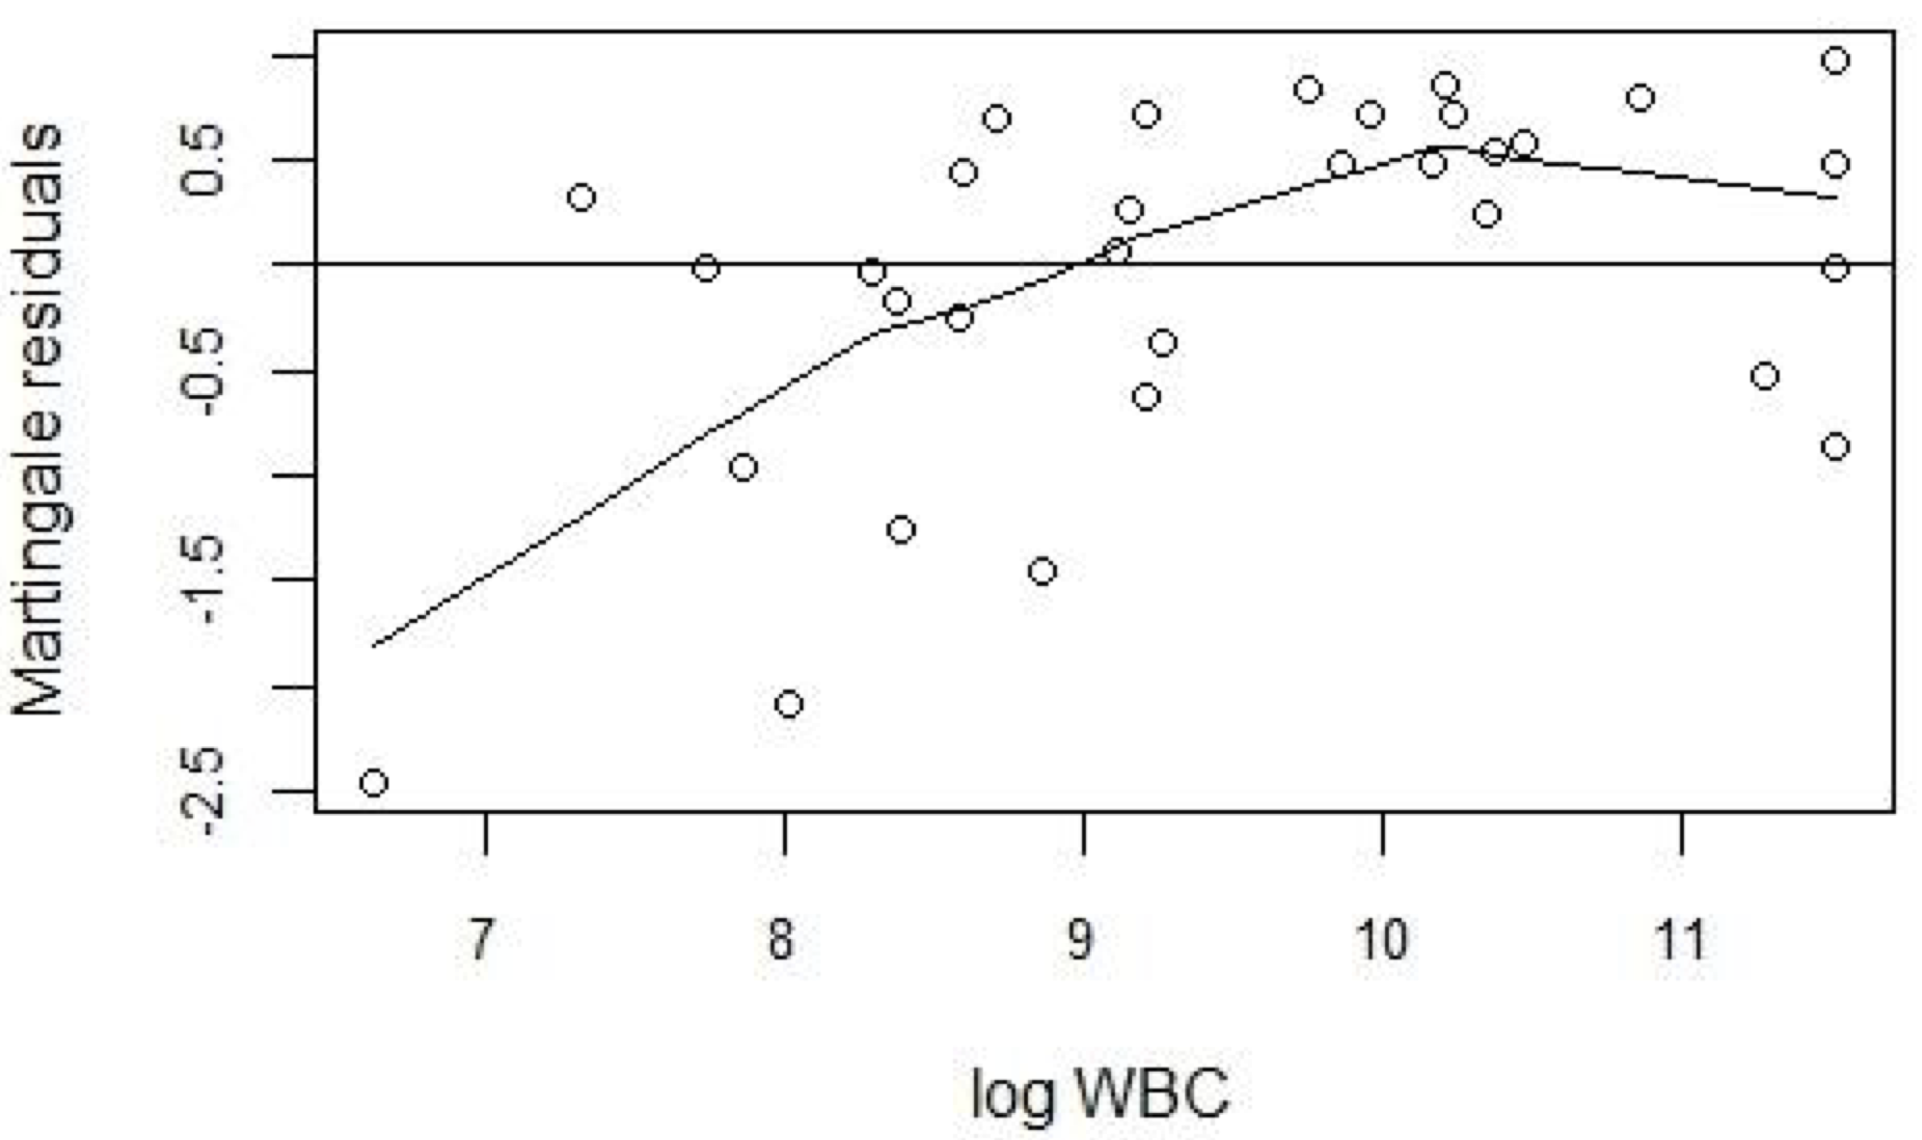 Plot of Martingale residuals (from a model with AG only) against log WBC.